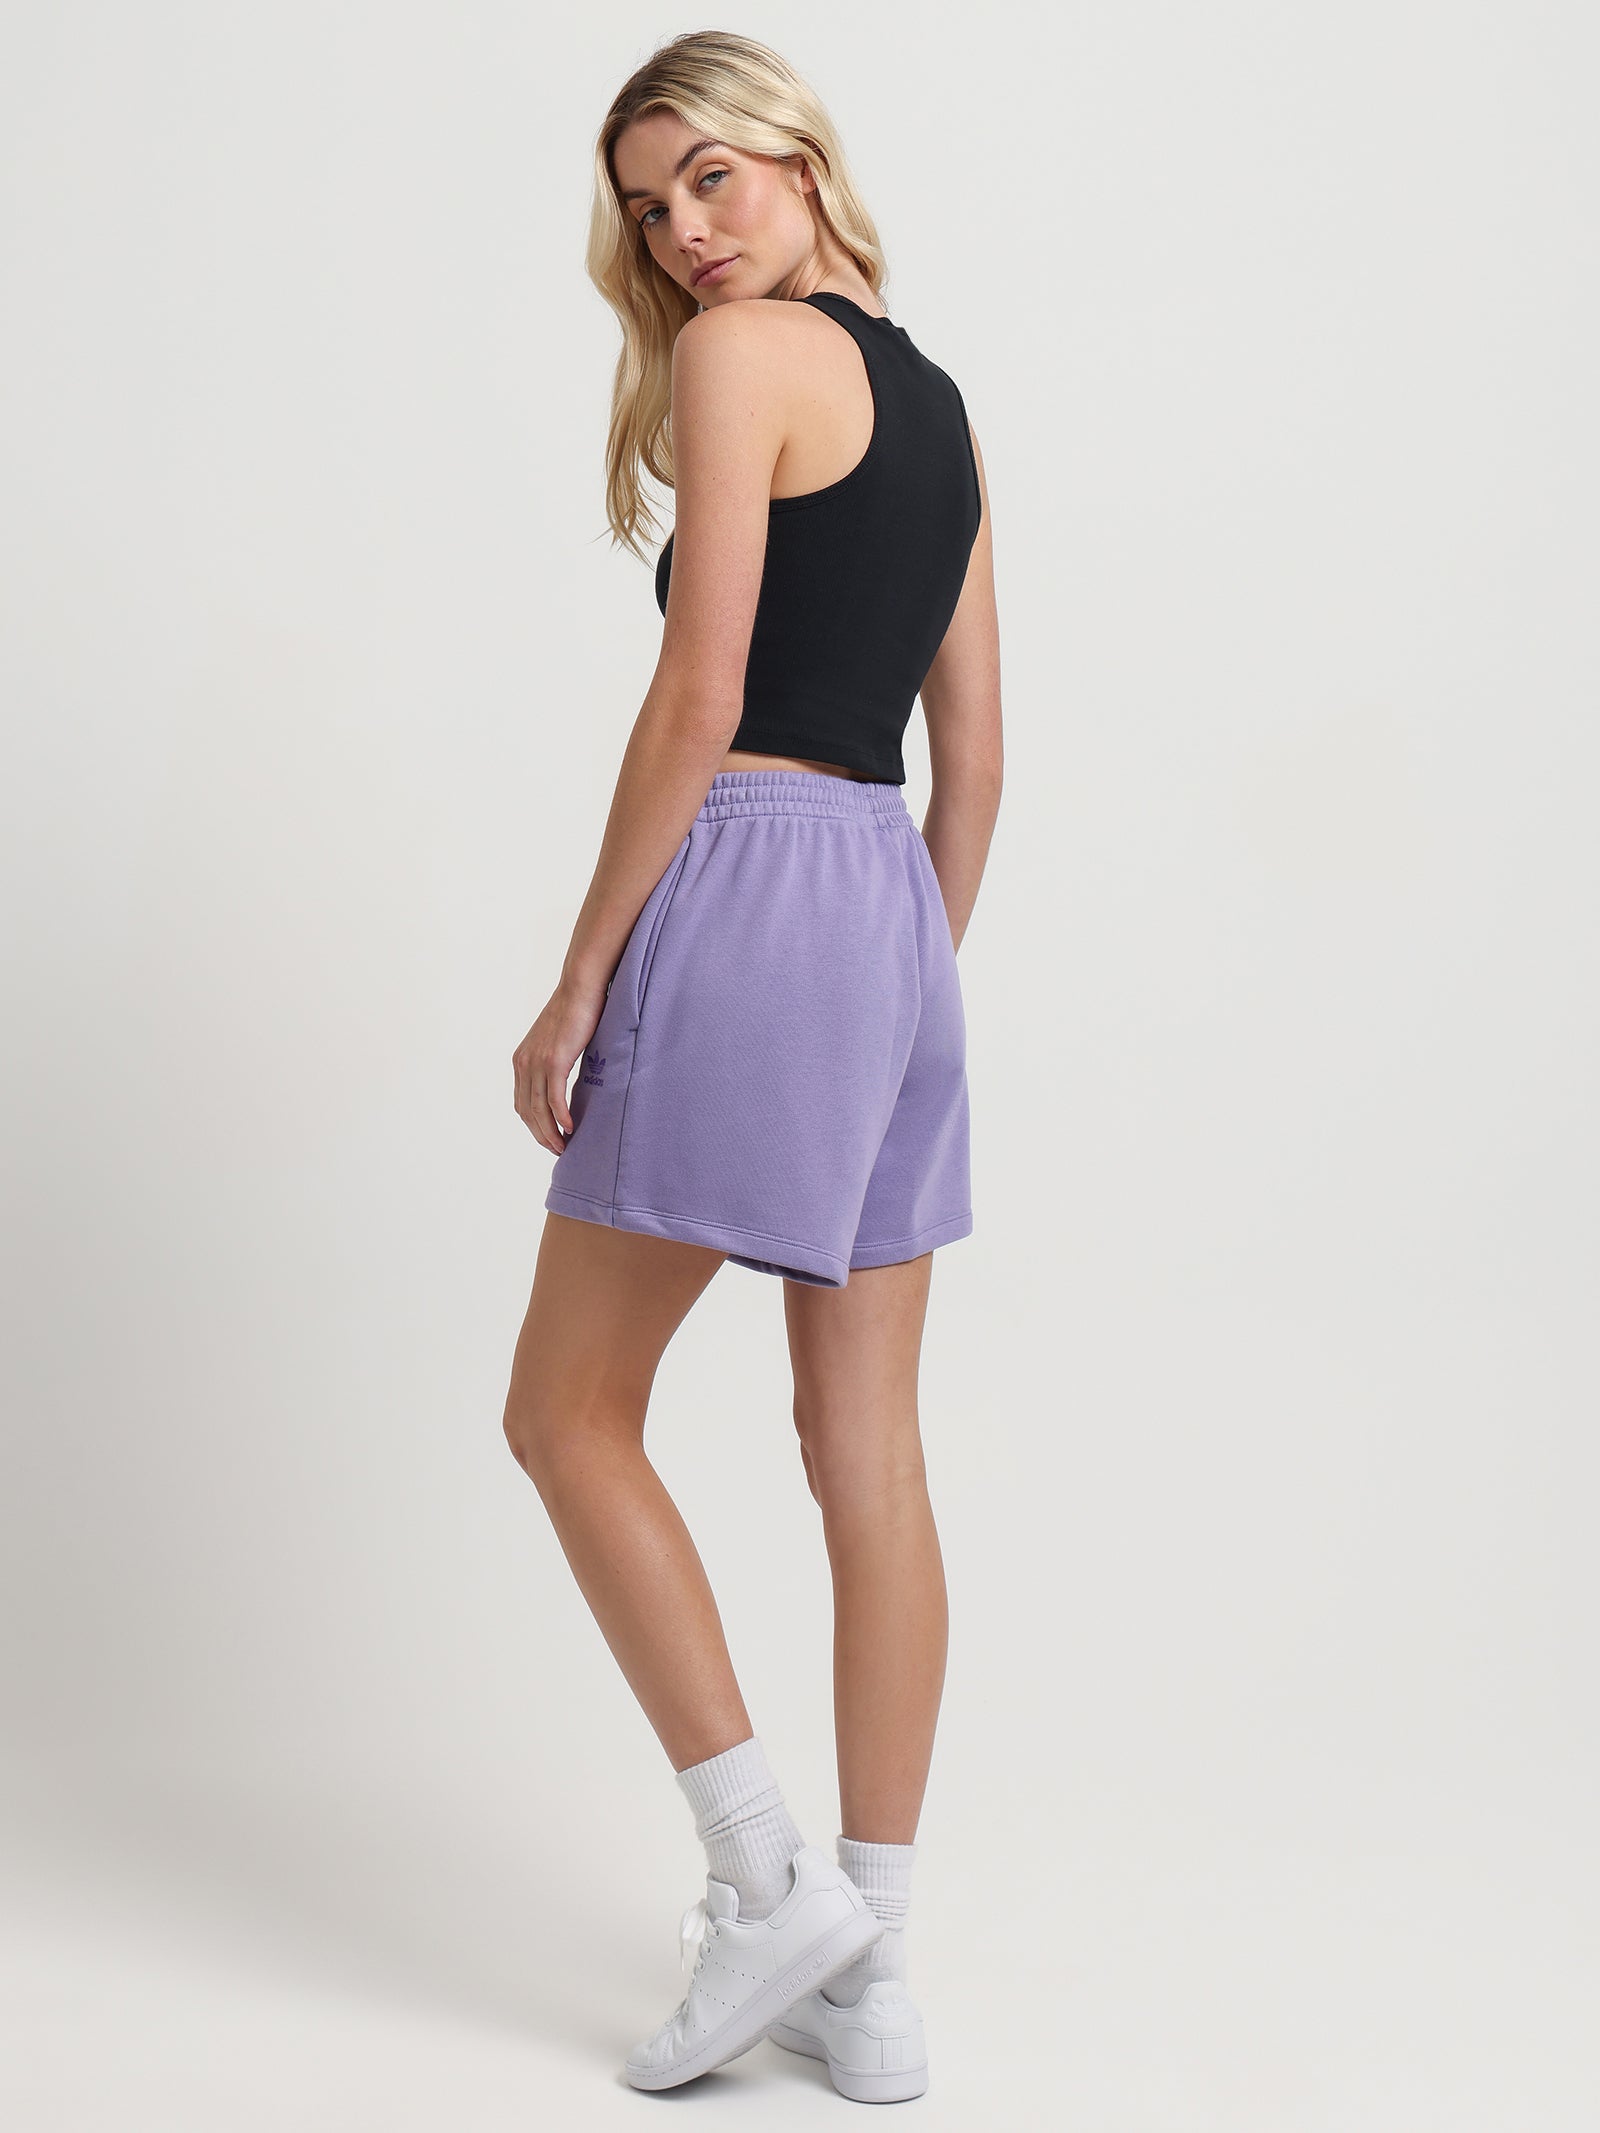 Glue Shorts Lilac Magic Adicolor - French Essentials Store Terry in